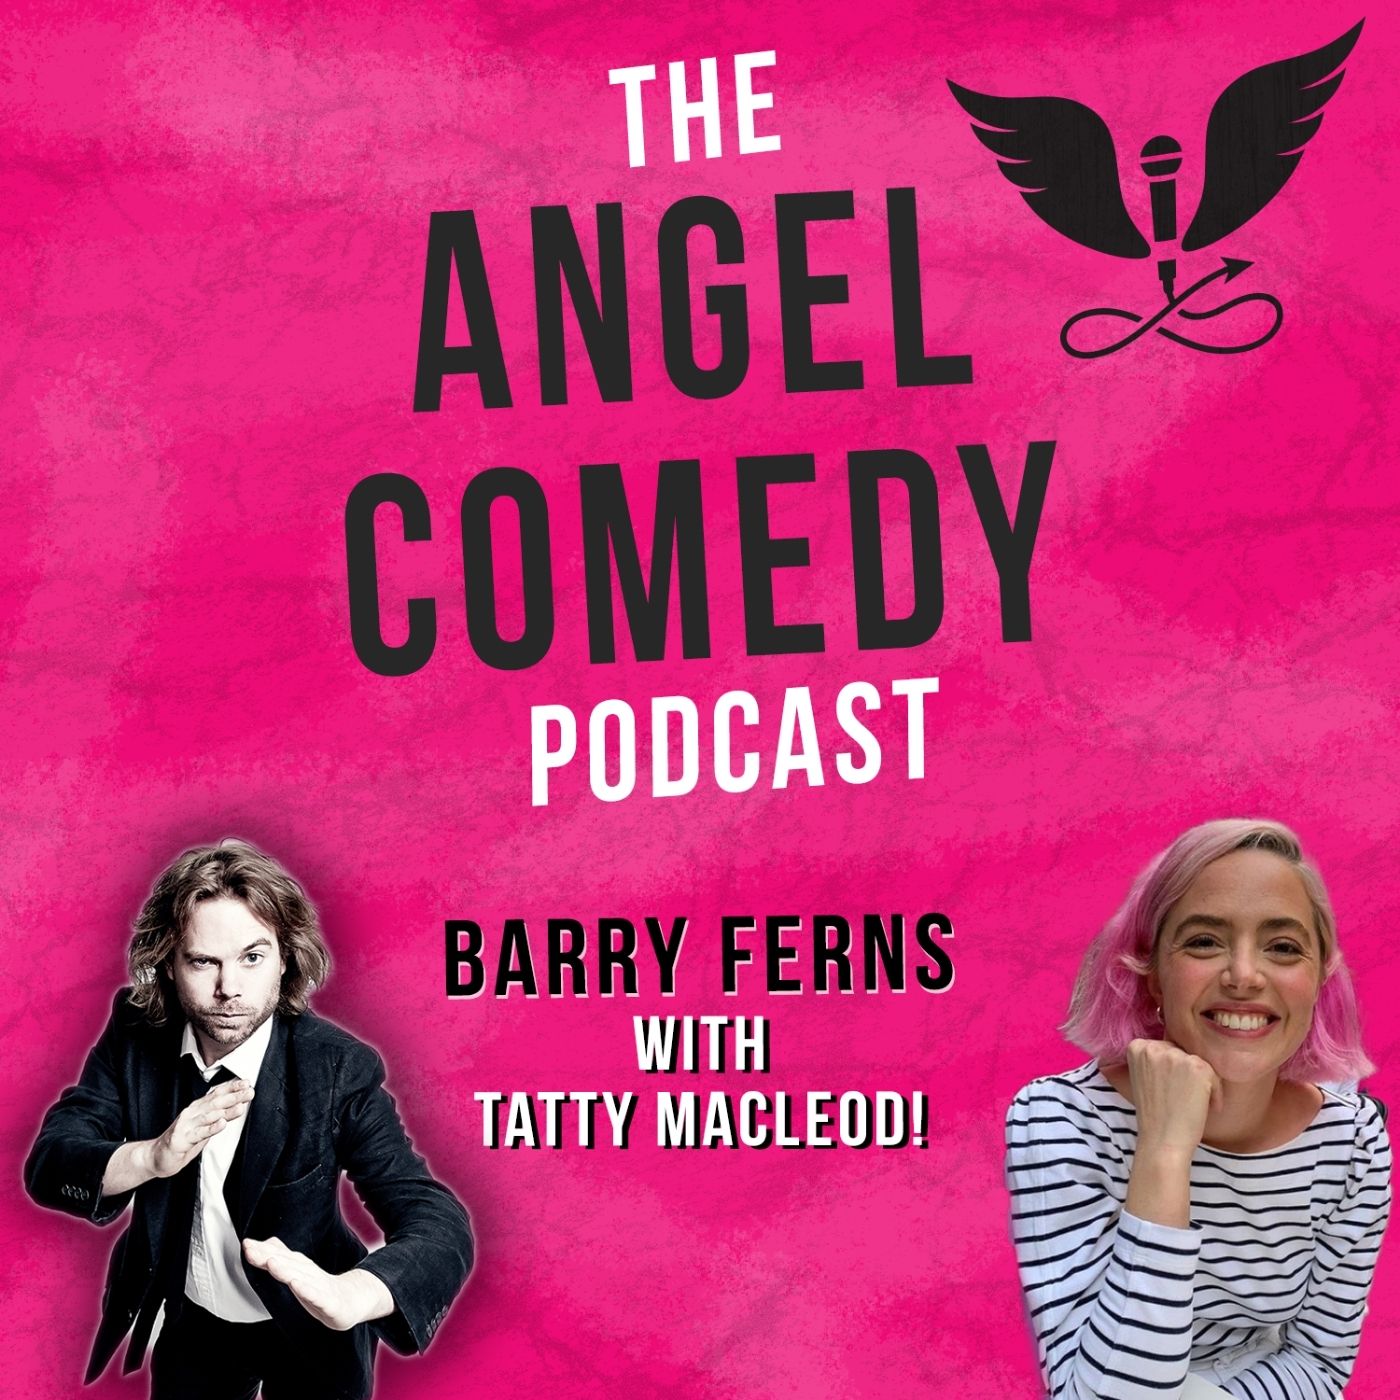 The Angel Comedy Podcast with Tatty Macleod!